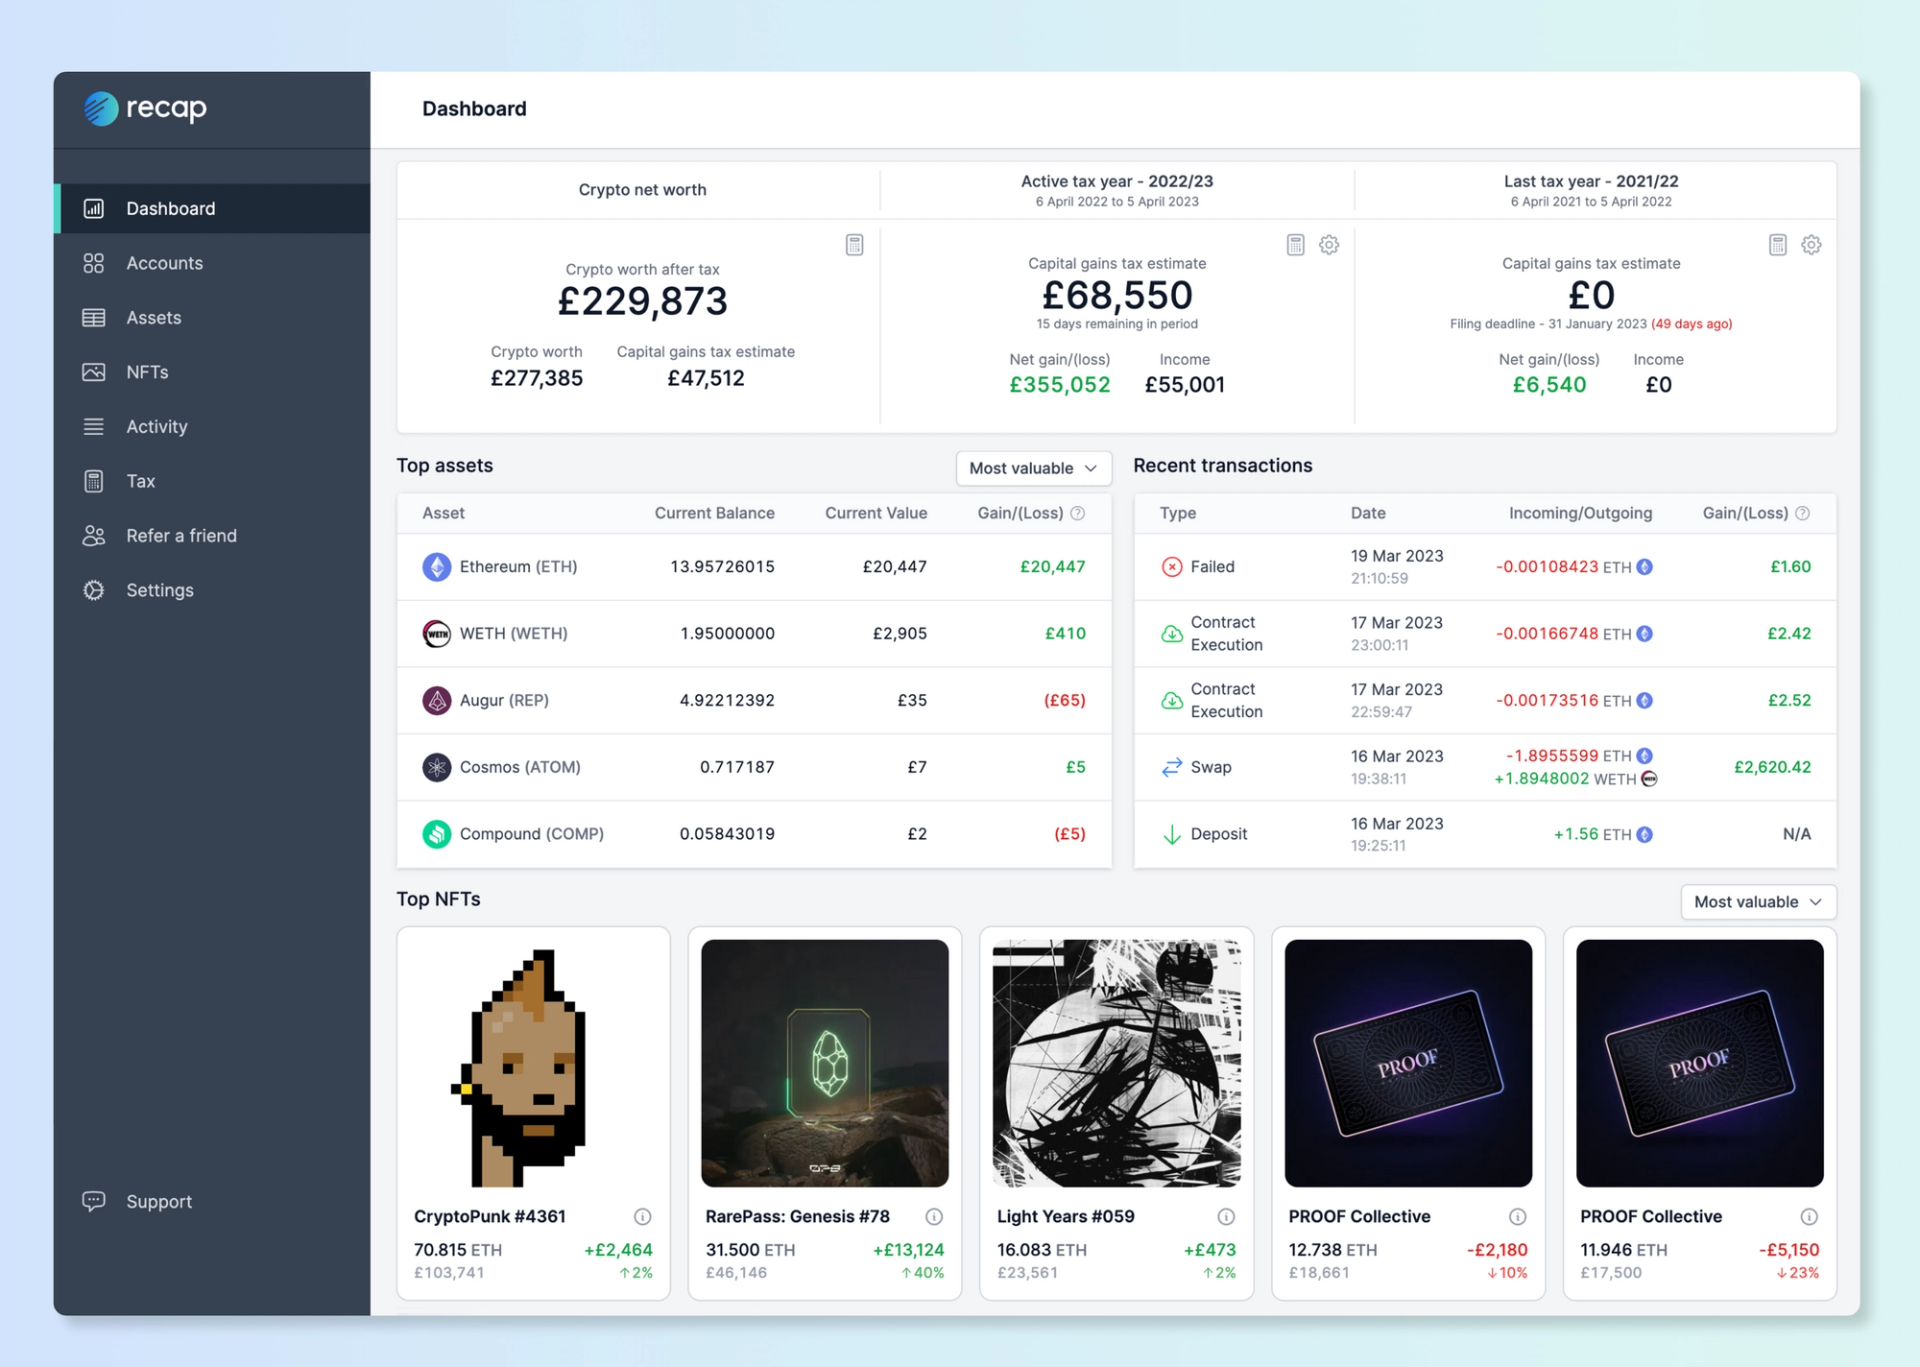 A screenshot of the Recap dashboard for UK investors showing capital gains estimations, top performing assets, recent transactions and top NFTs.